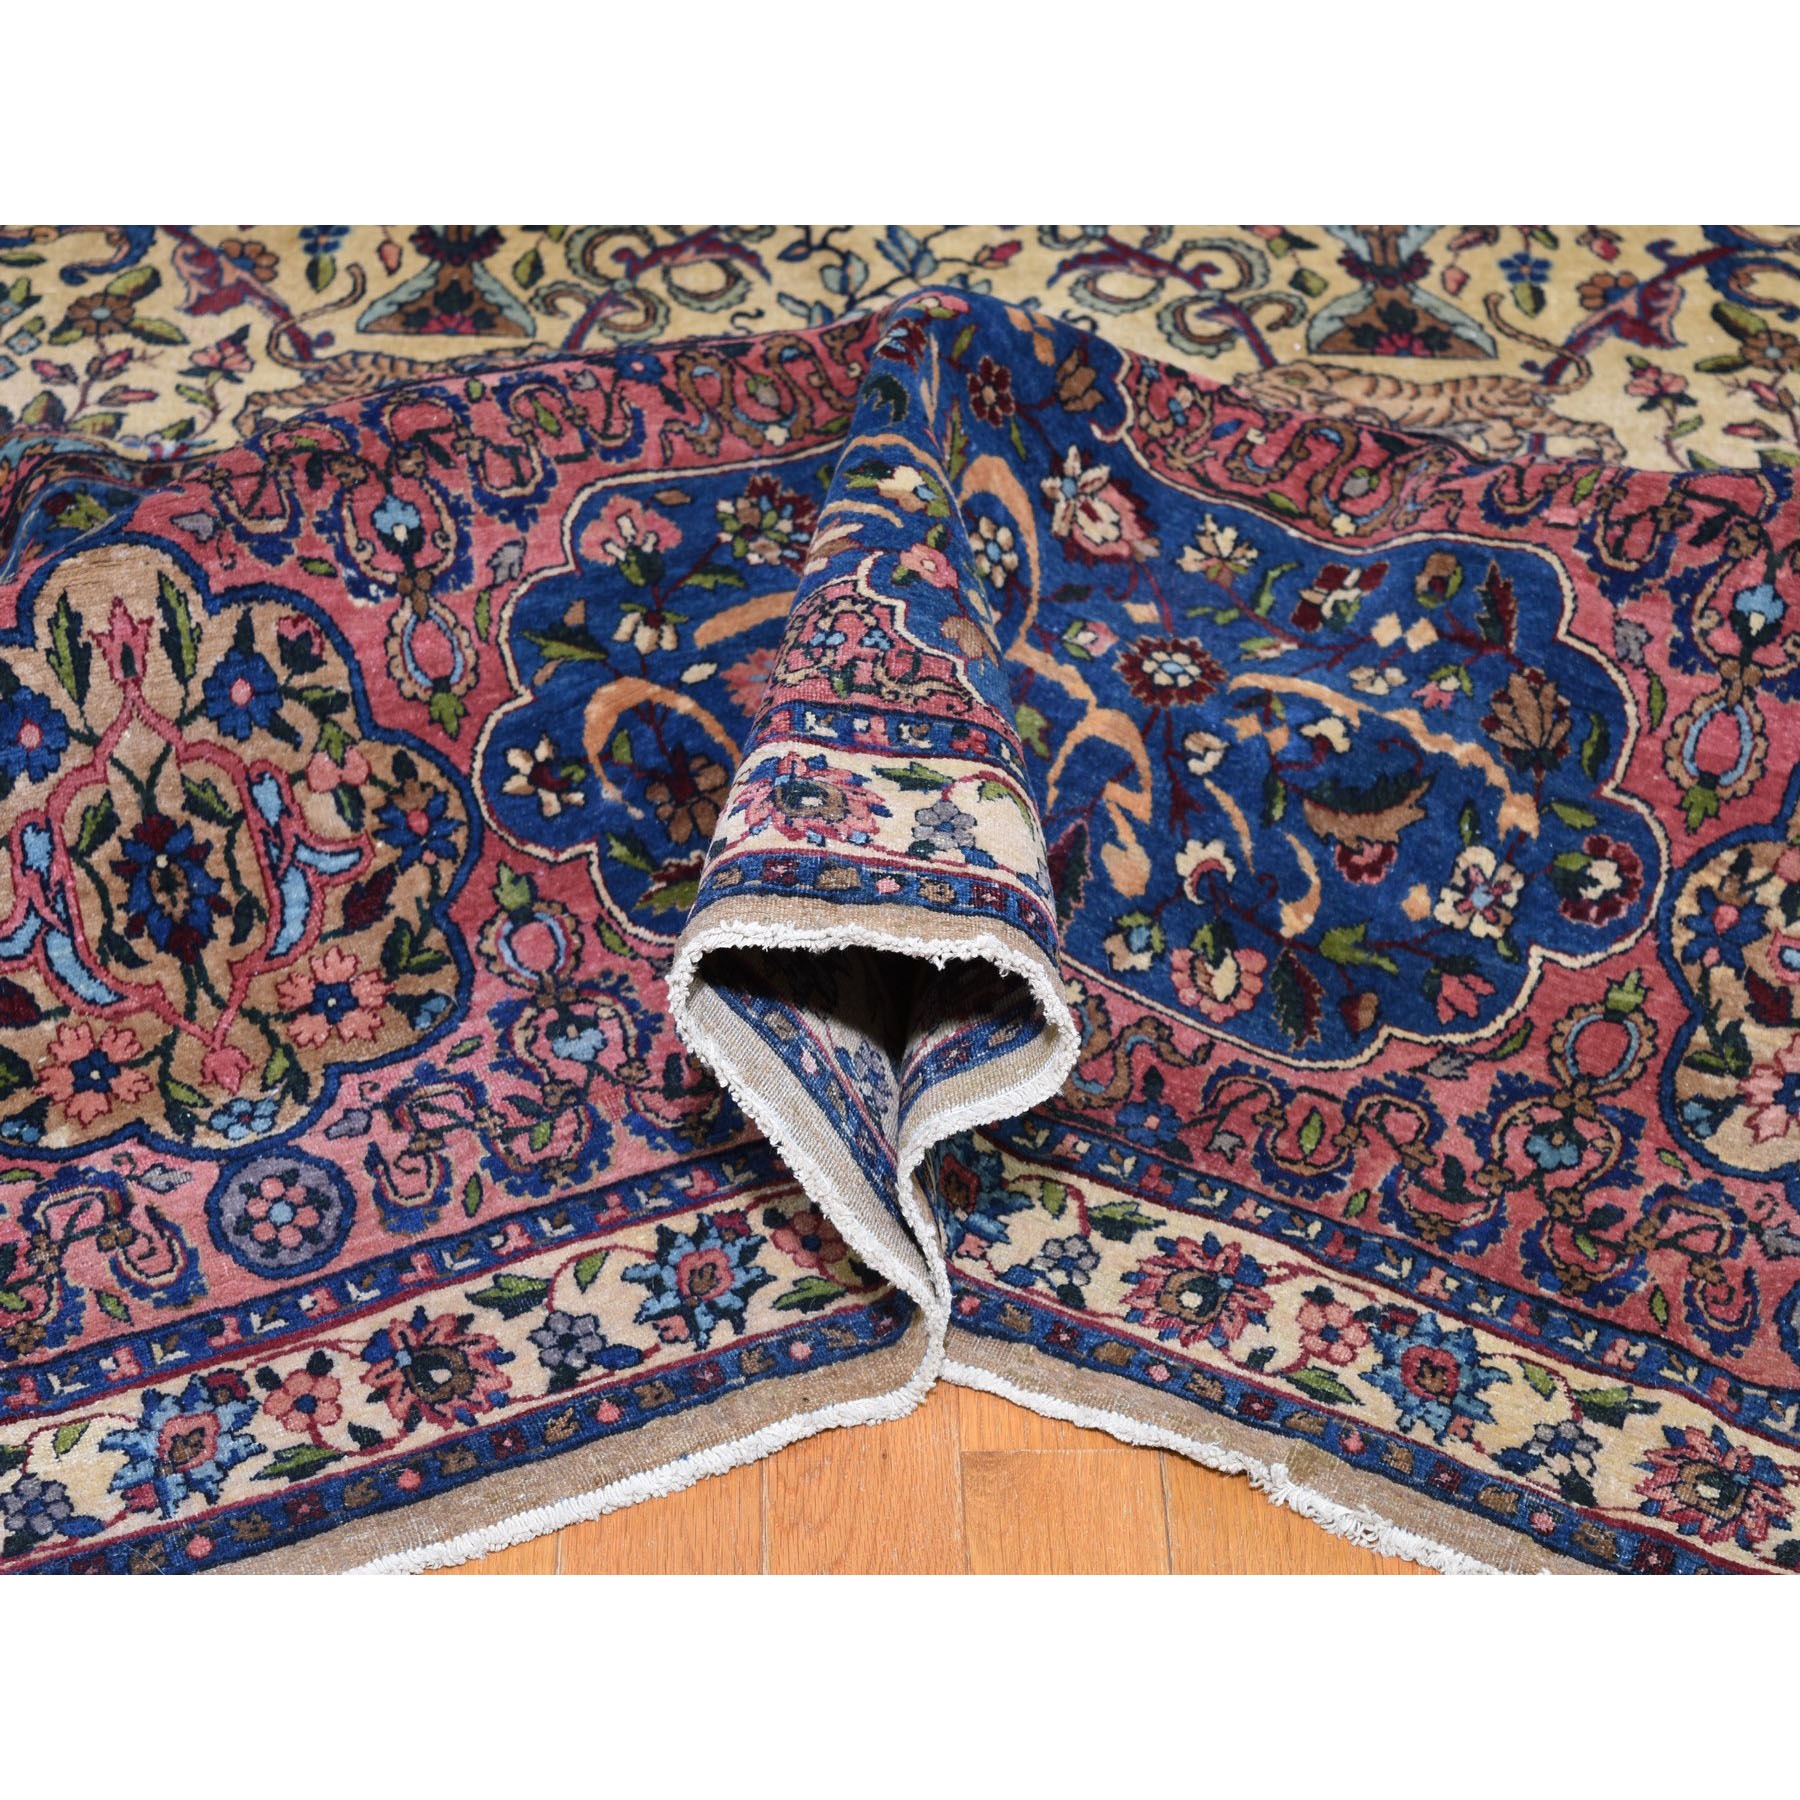 13'9"x19'10" Antique Persian Kerman with Poetry and Animals Oversize Oriental Rug 